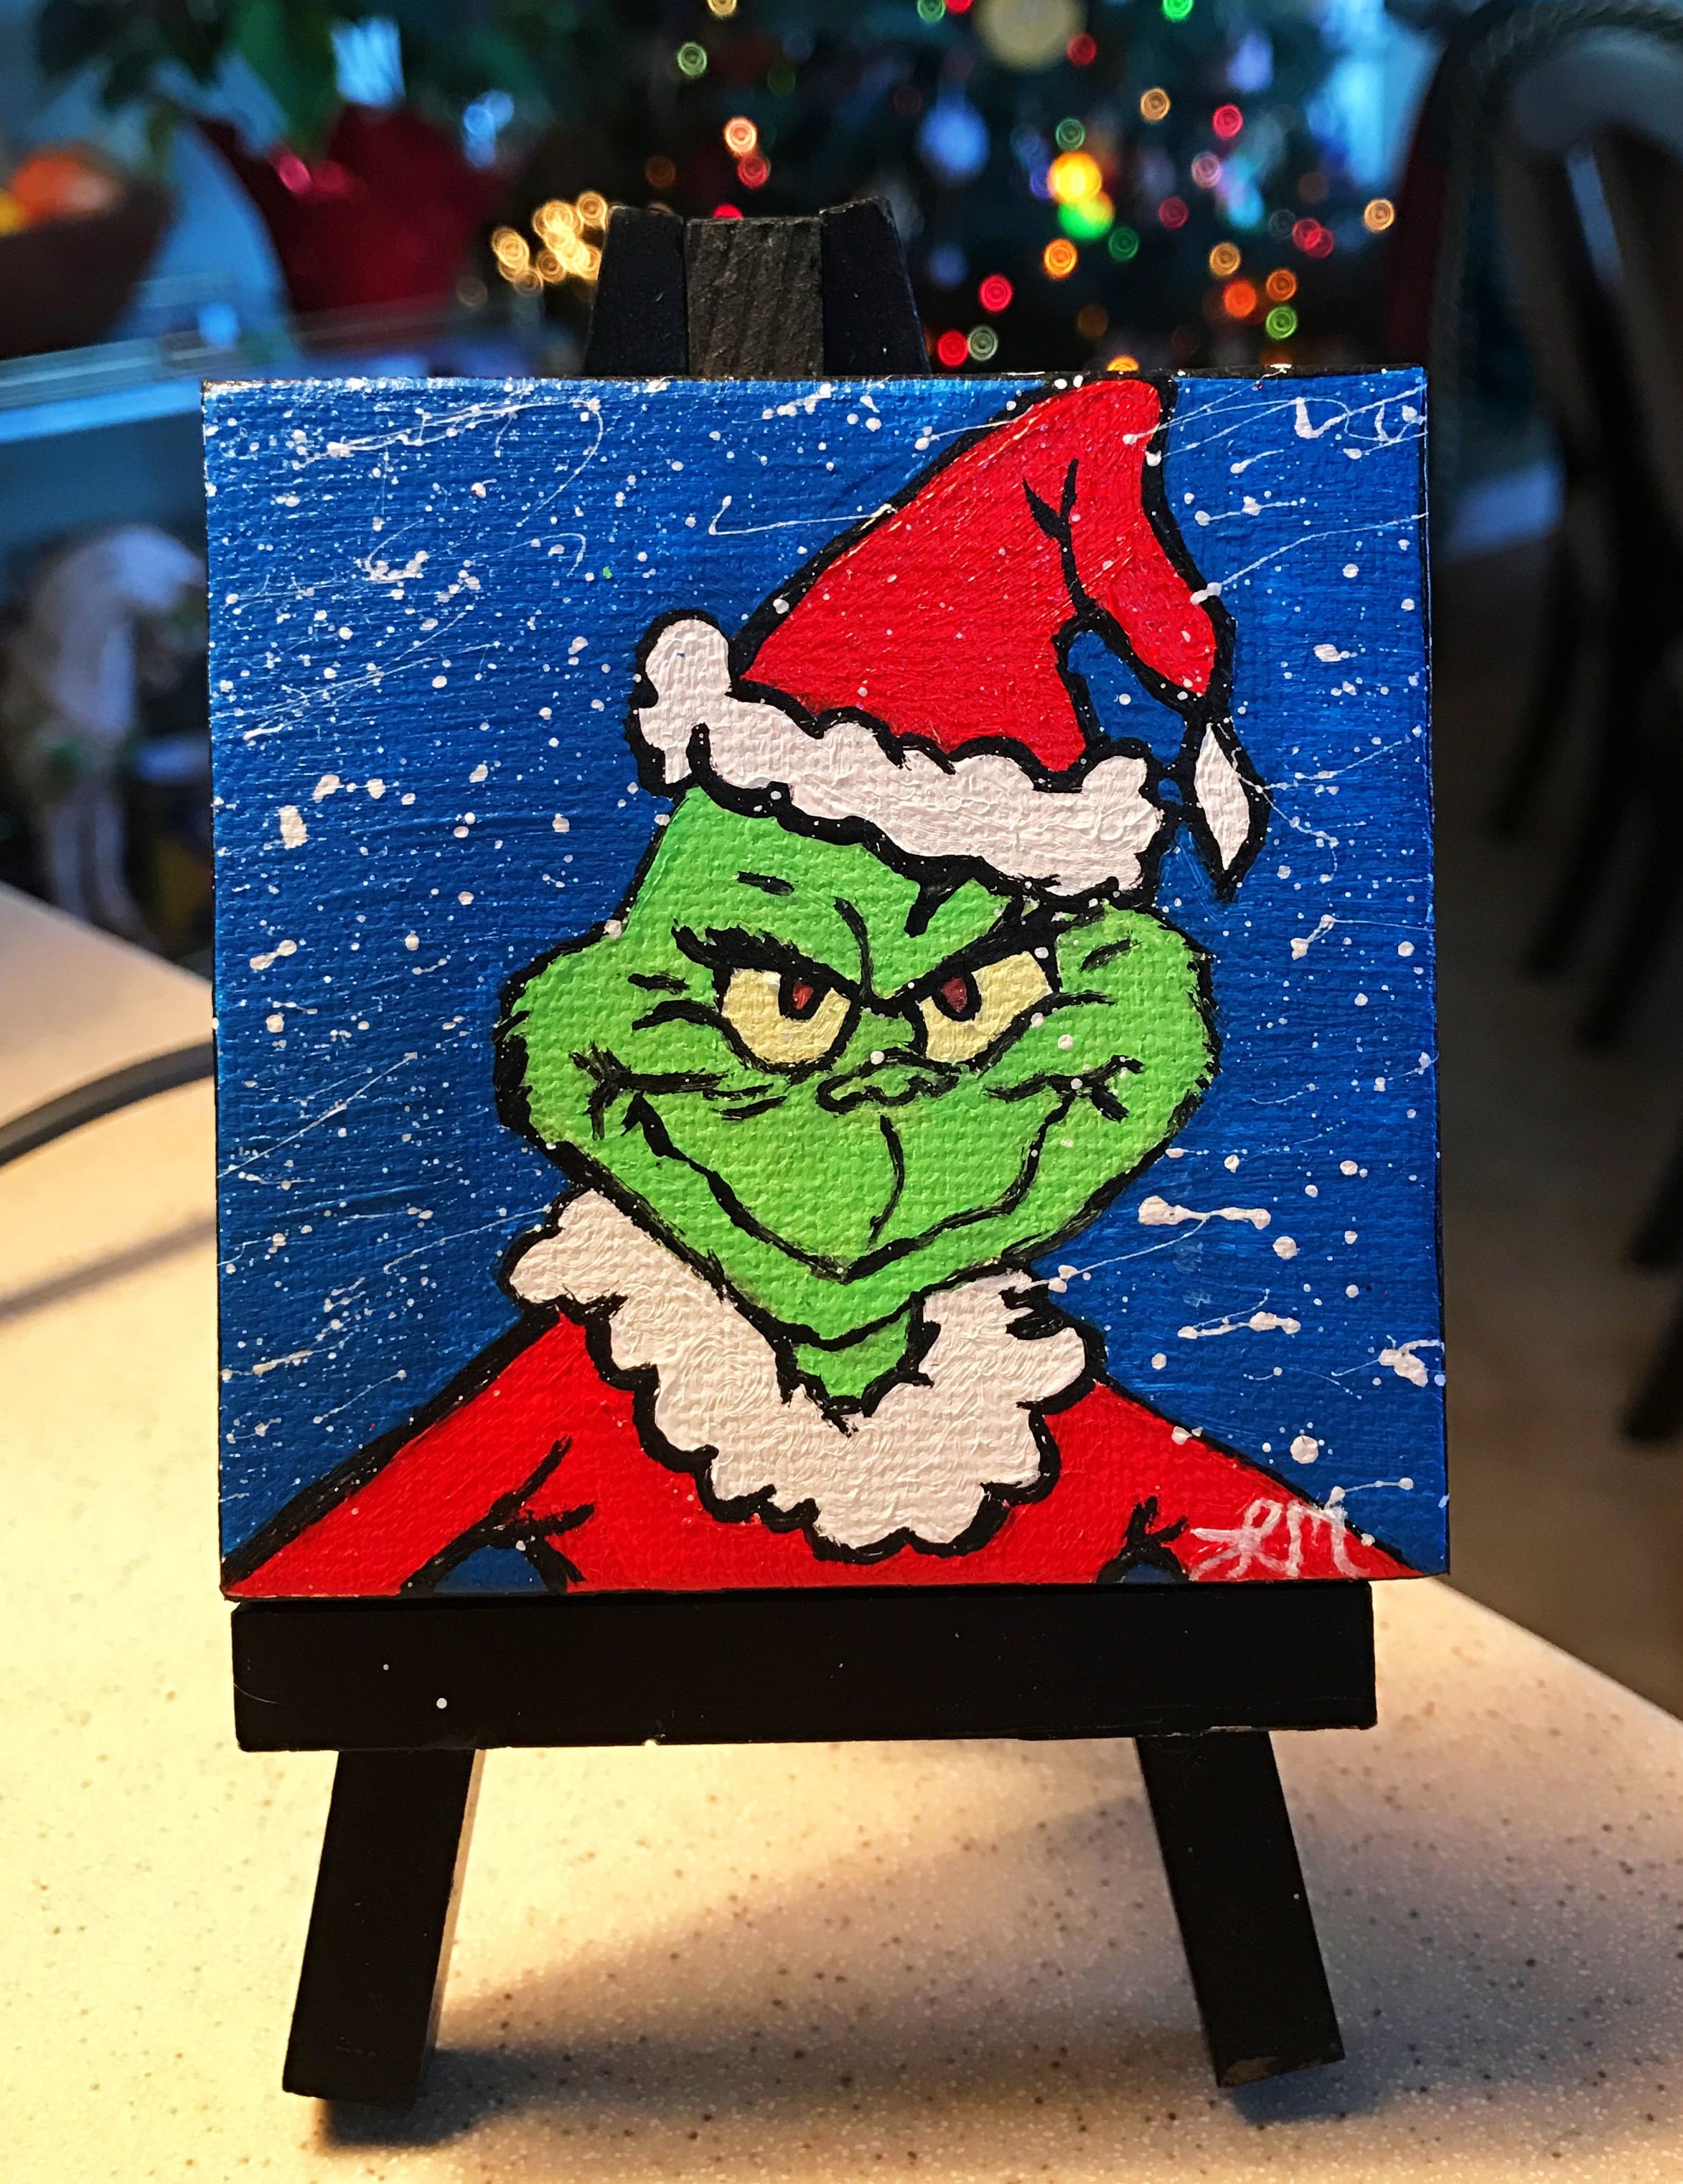 Mini painting of the Grinch